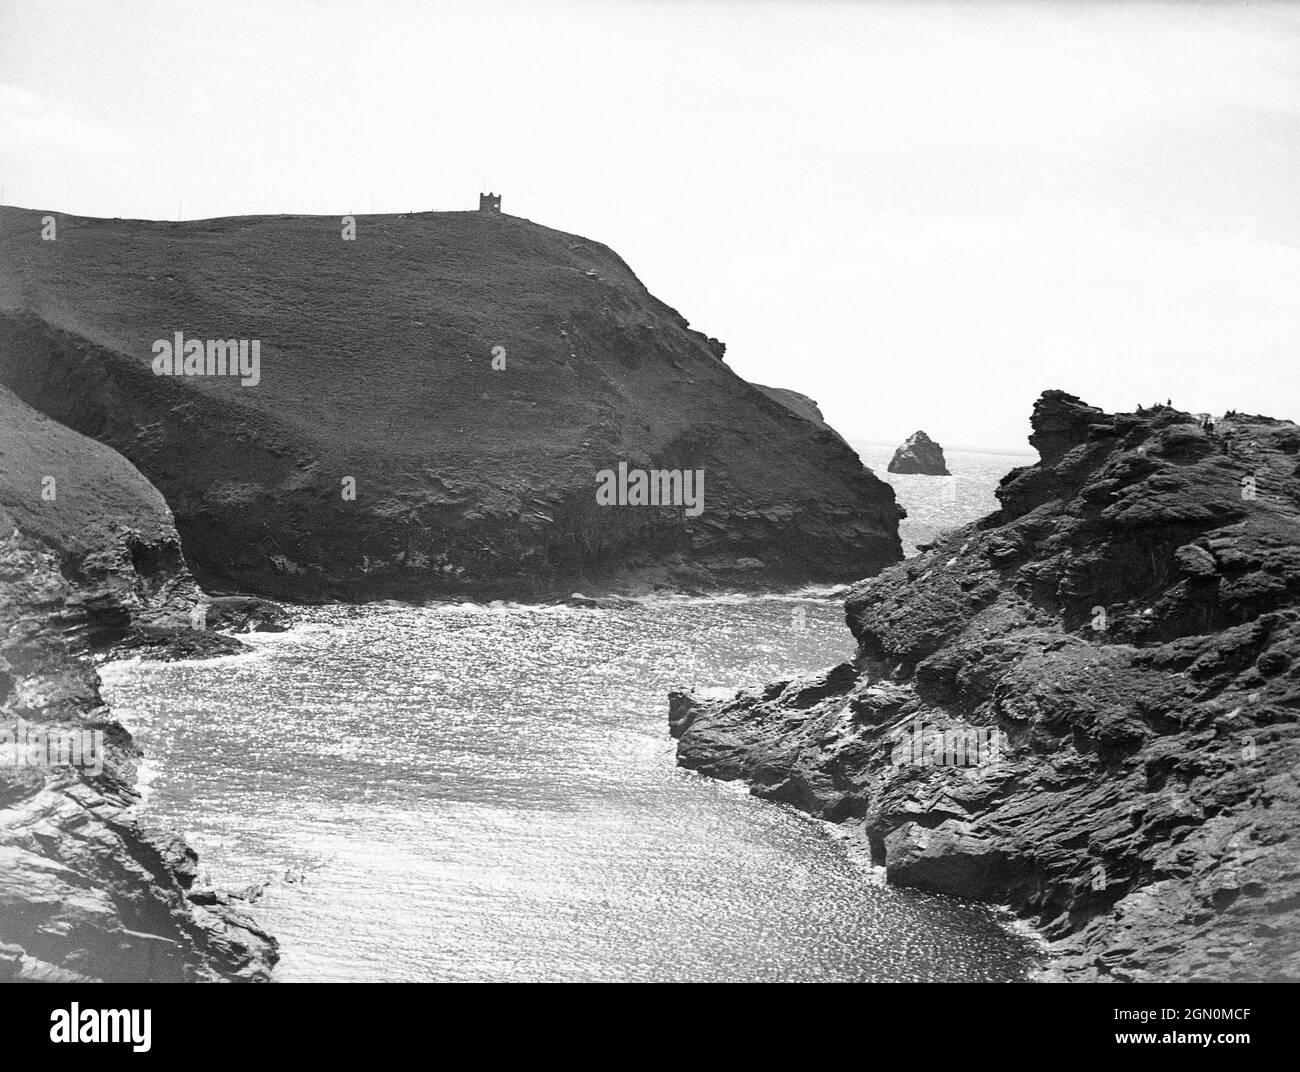 1950s, historical, view of the rugged, rocky landscape beside an ocean cove or inlet at Land's End, Cornwall, in the far South west of England, UK. The Cornish coast is full of small rock lined coves, which in the 19th and 20th centuries saw smugglers bring goods such as wine and spirits onto the shore. Stock Photo